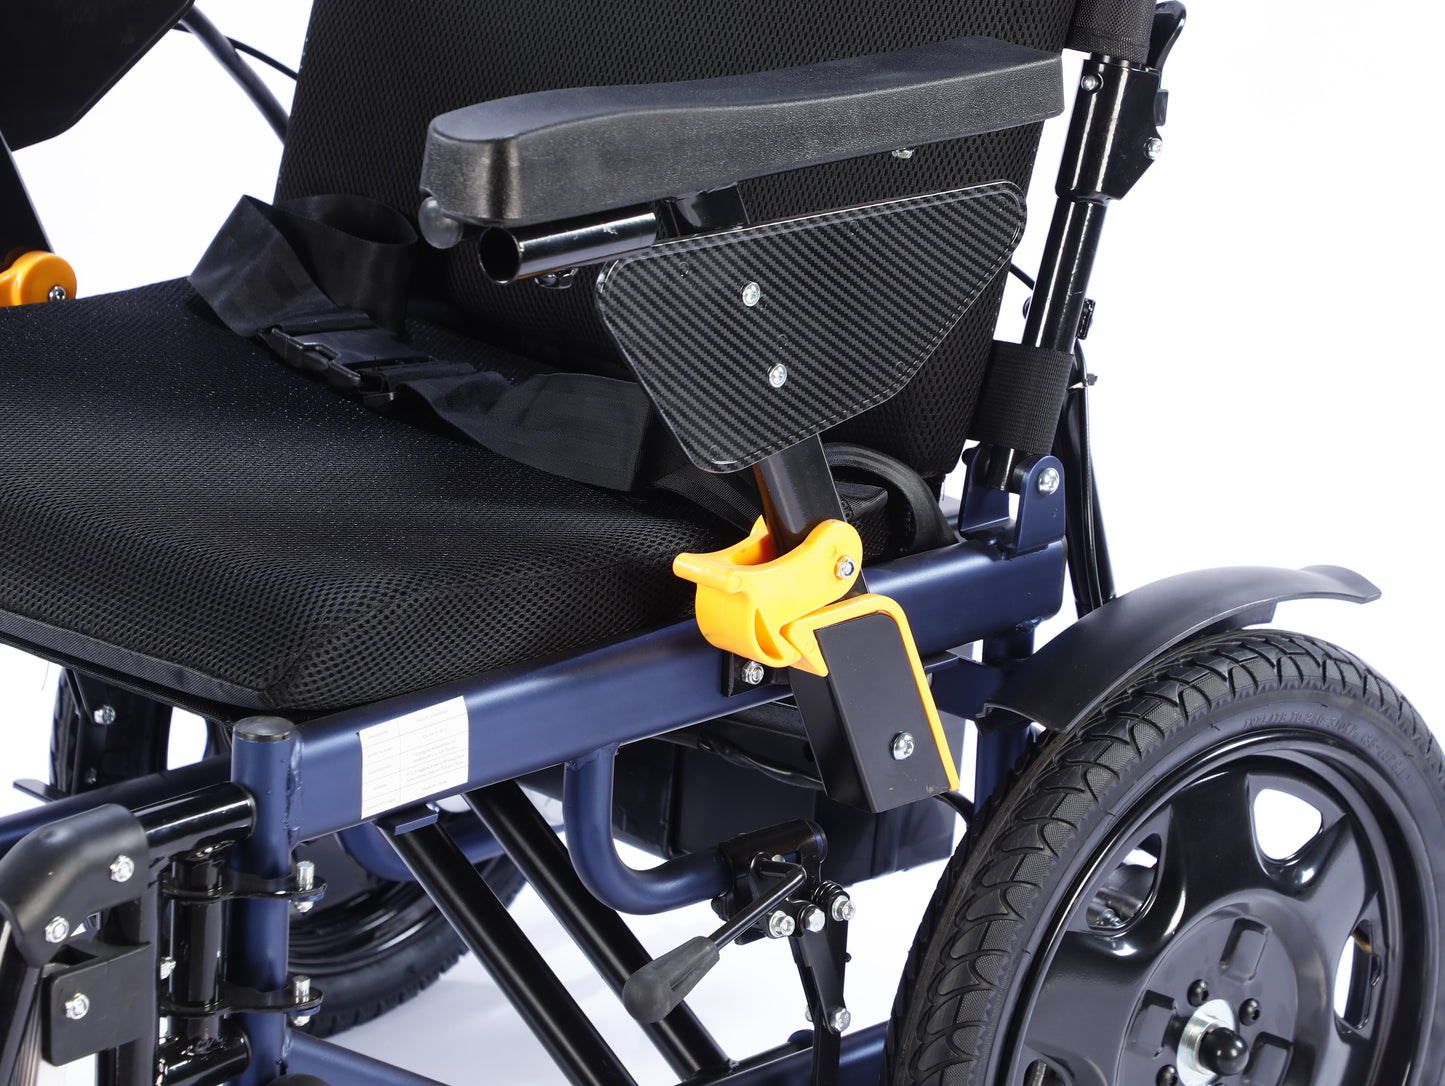 Load image into Gallery viewer, Dr.Ortho electric wheelchair DR-N-40-E blue frame with Detached hydrulic Adjustable Footrest and Recling Backrest
